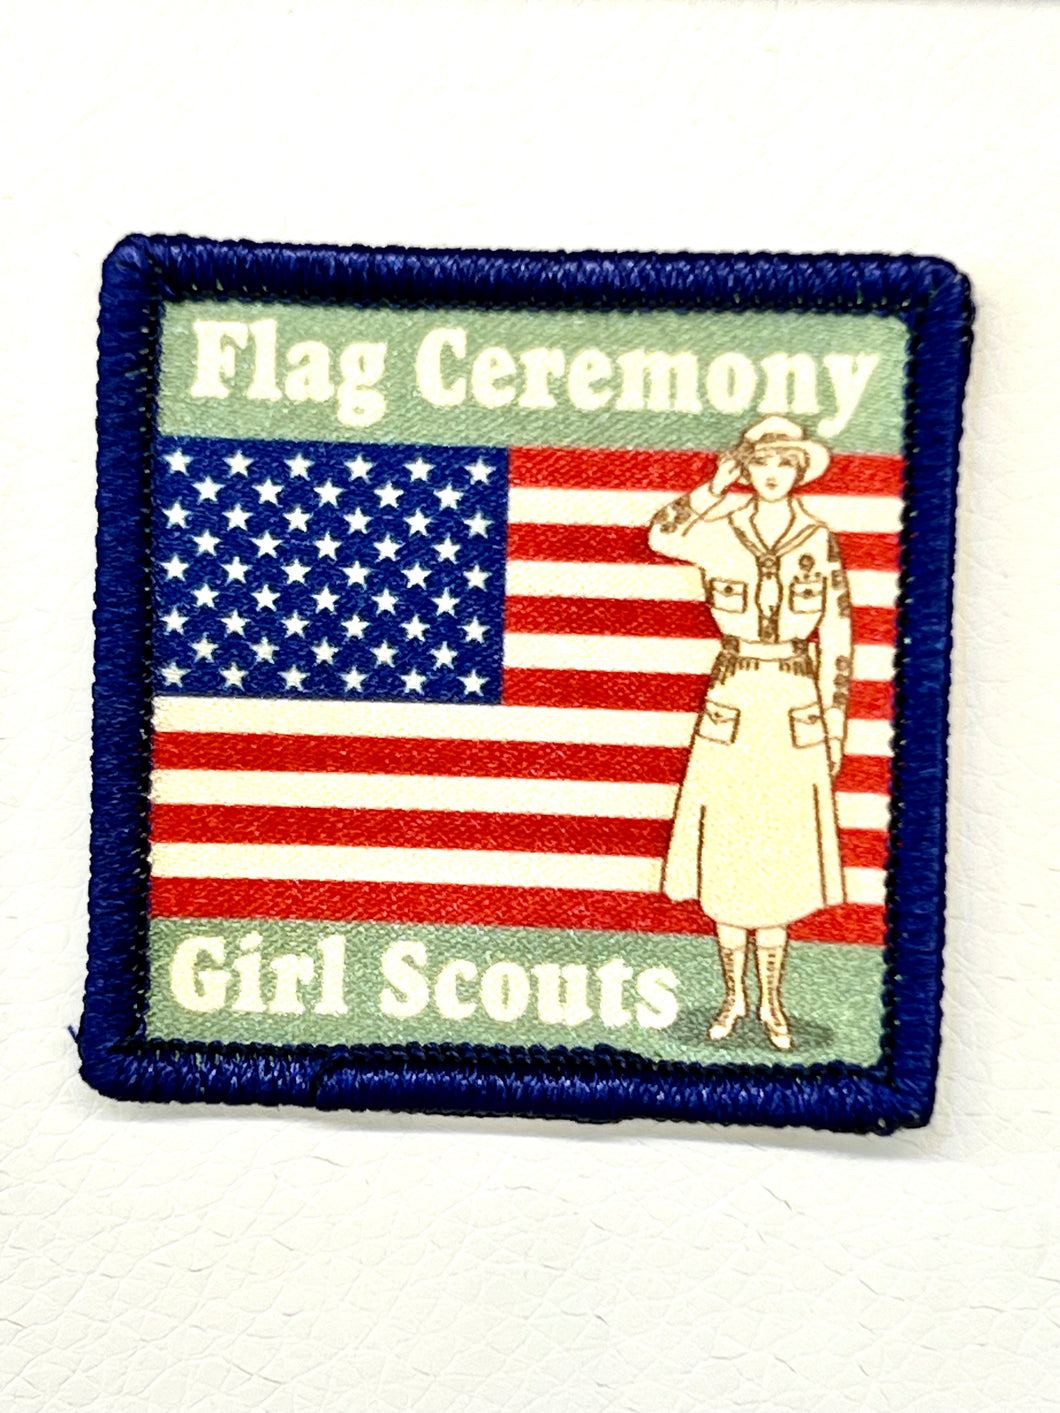 Girl Scouts vintage flag ceremony sew on patch